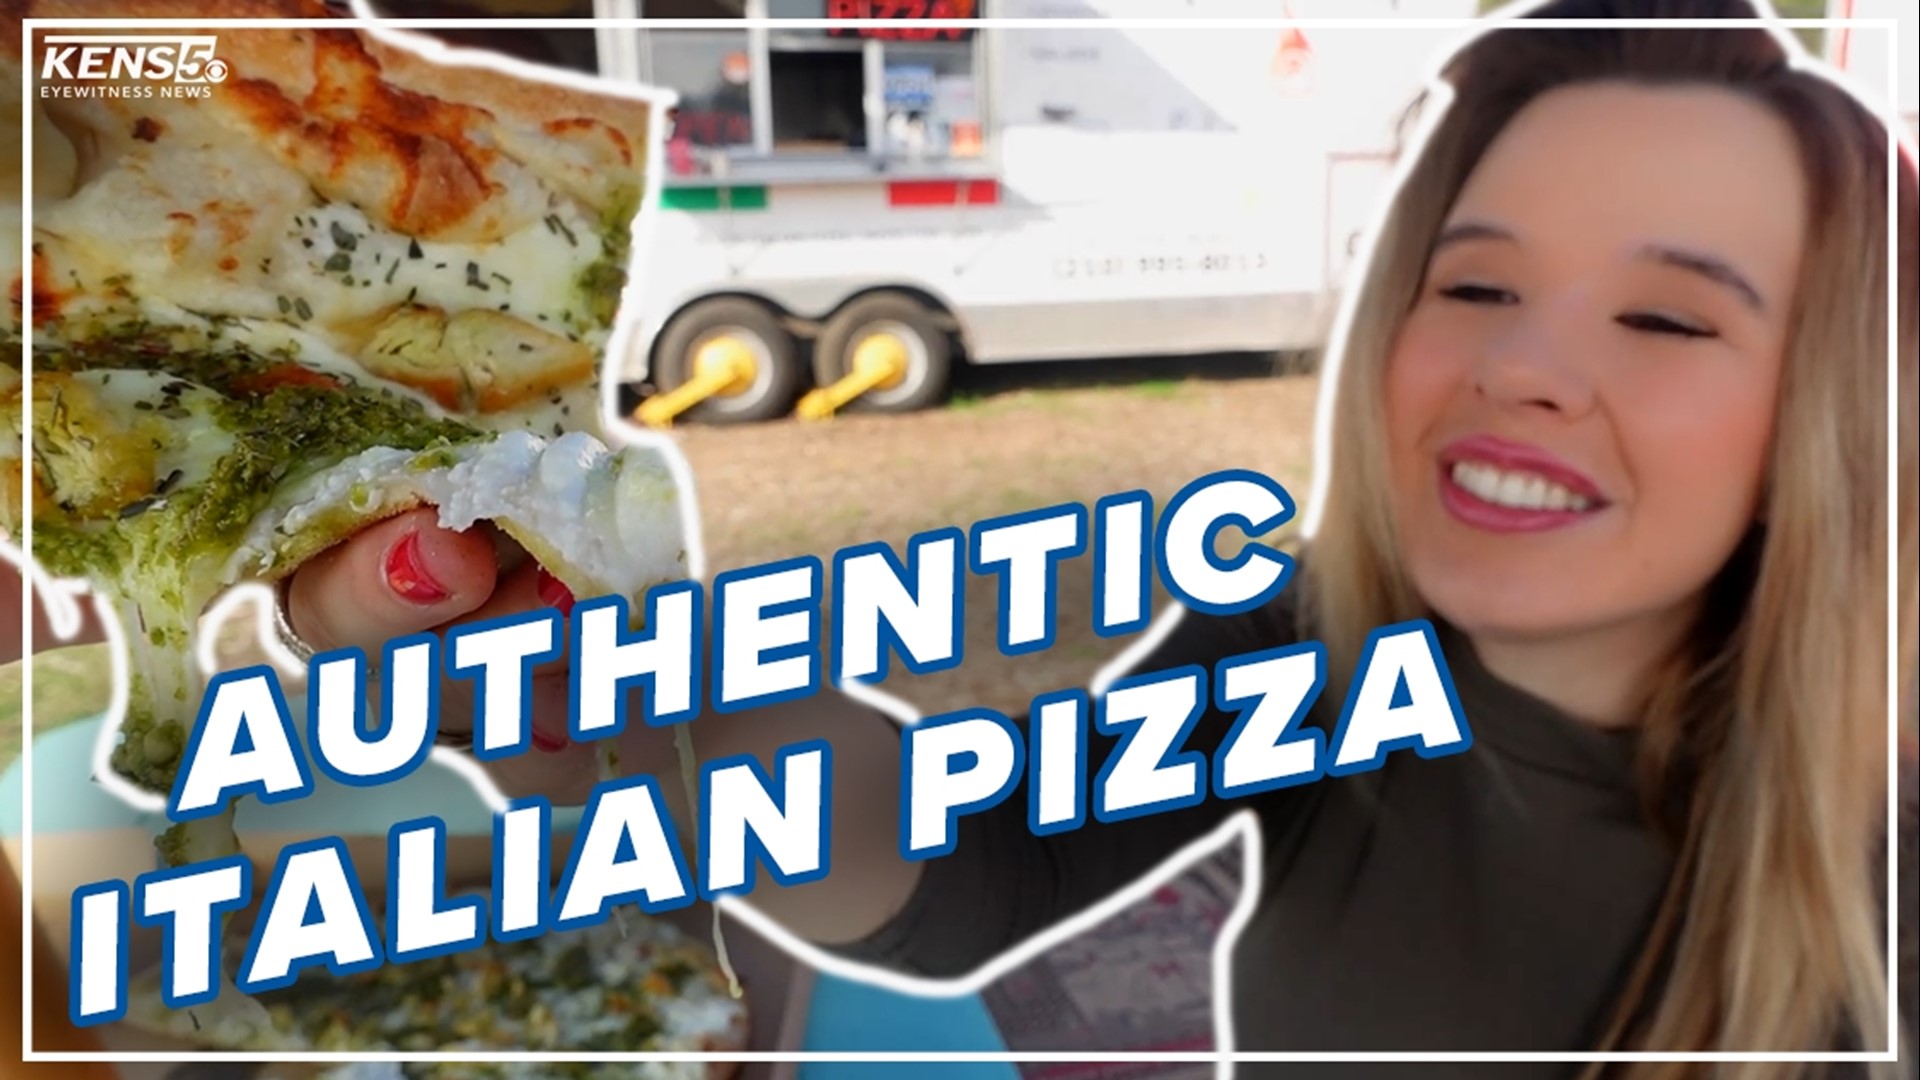 You know a pizza is good when you take a bite and hear the crunch. And that's exactly what you'll find at Fiamma Pizzeria. And Lexi Hazlett tried it!